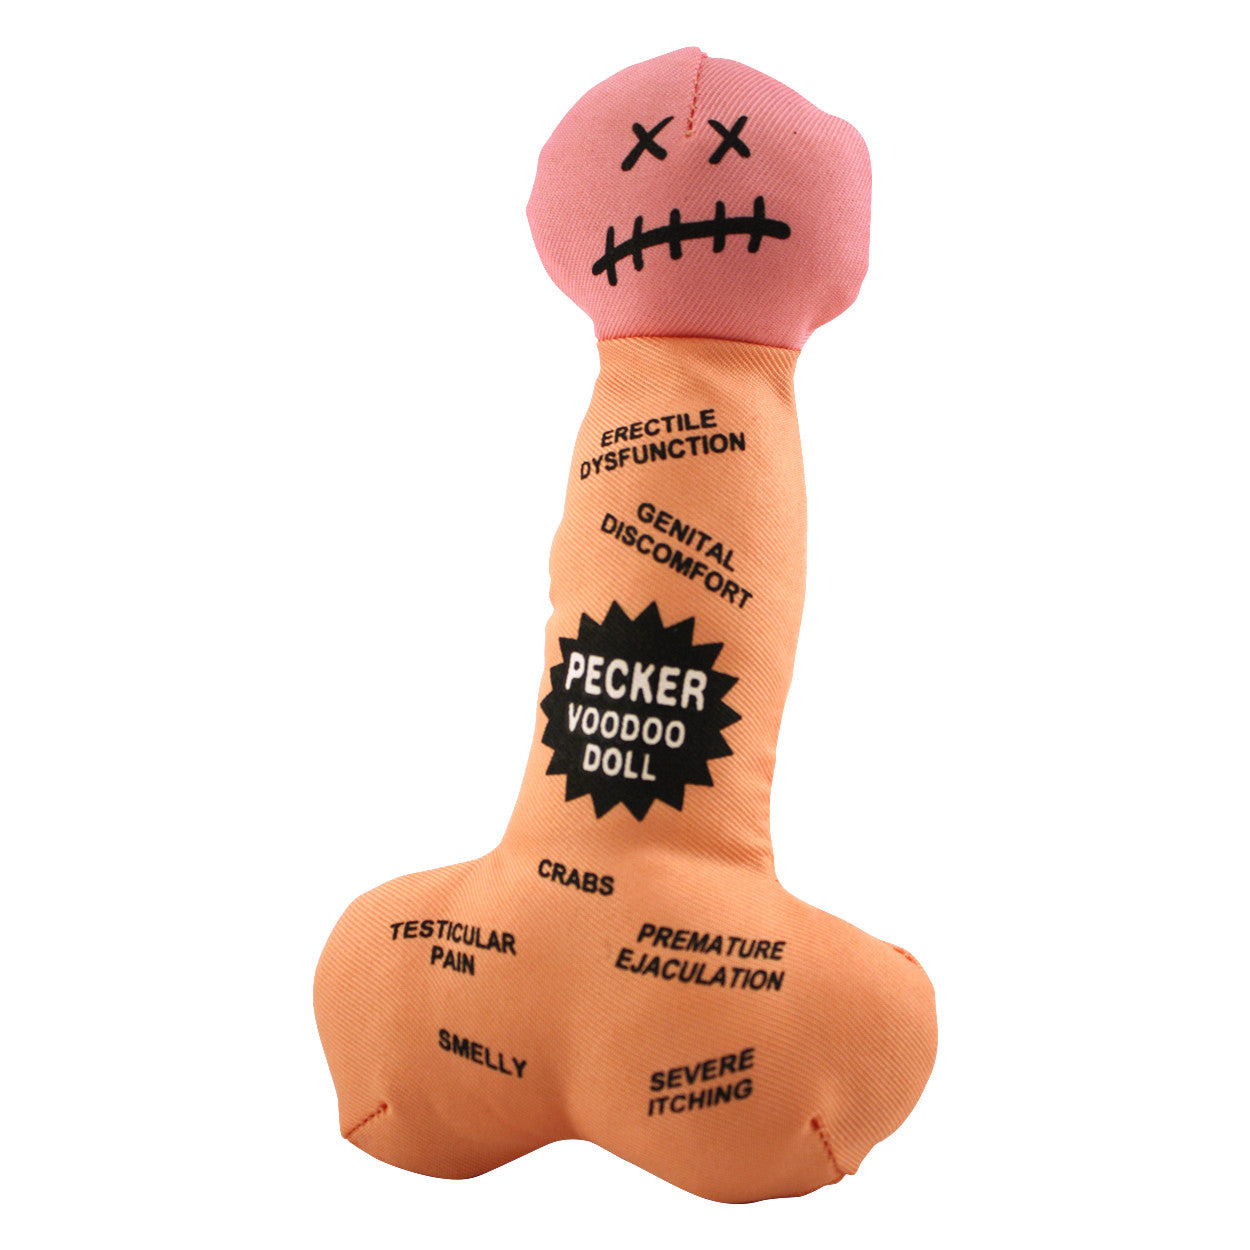 Image of The Penis VooDoo Doll